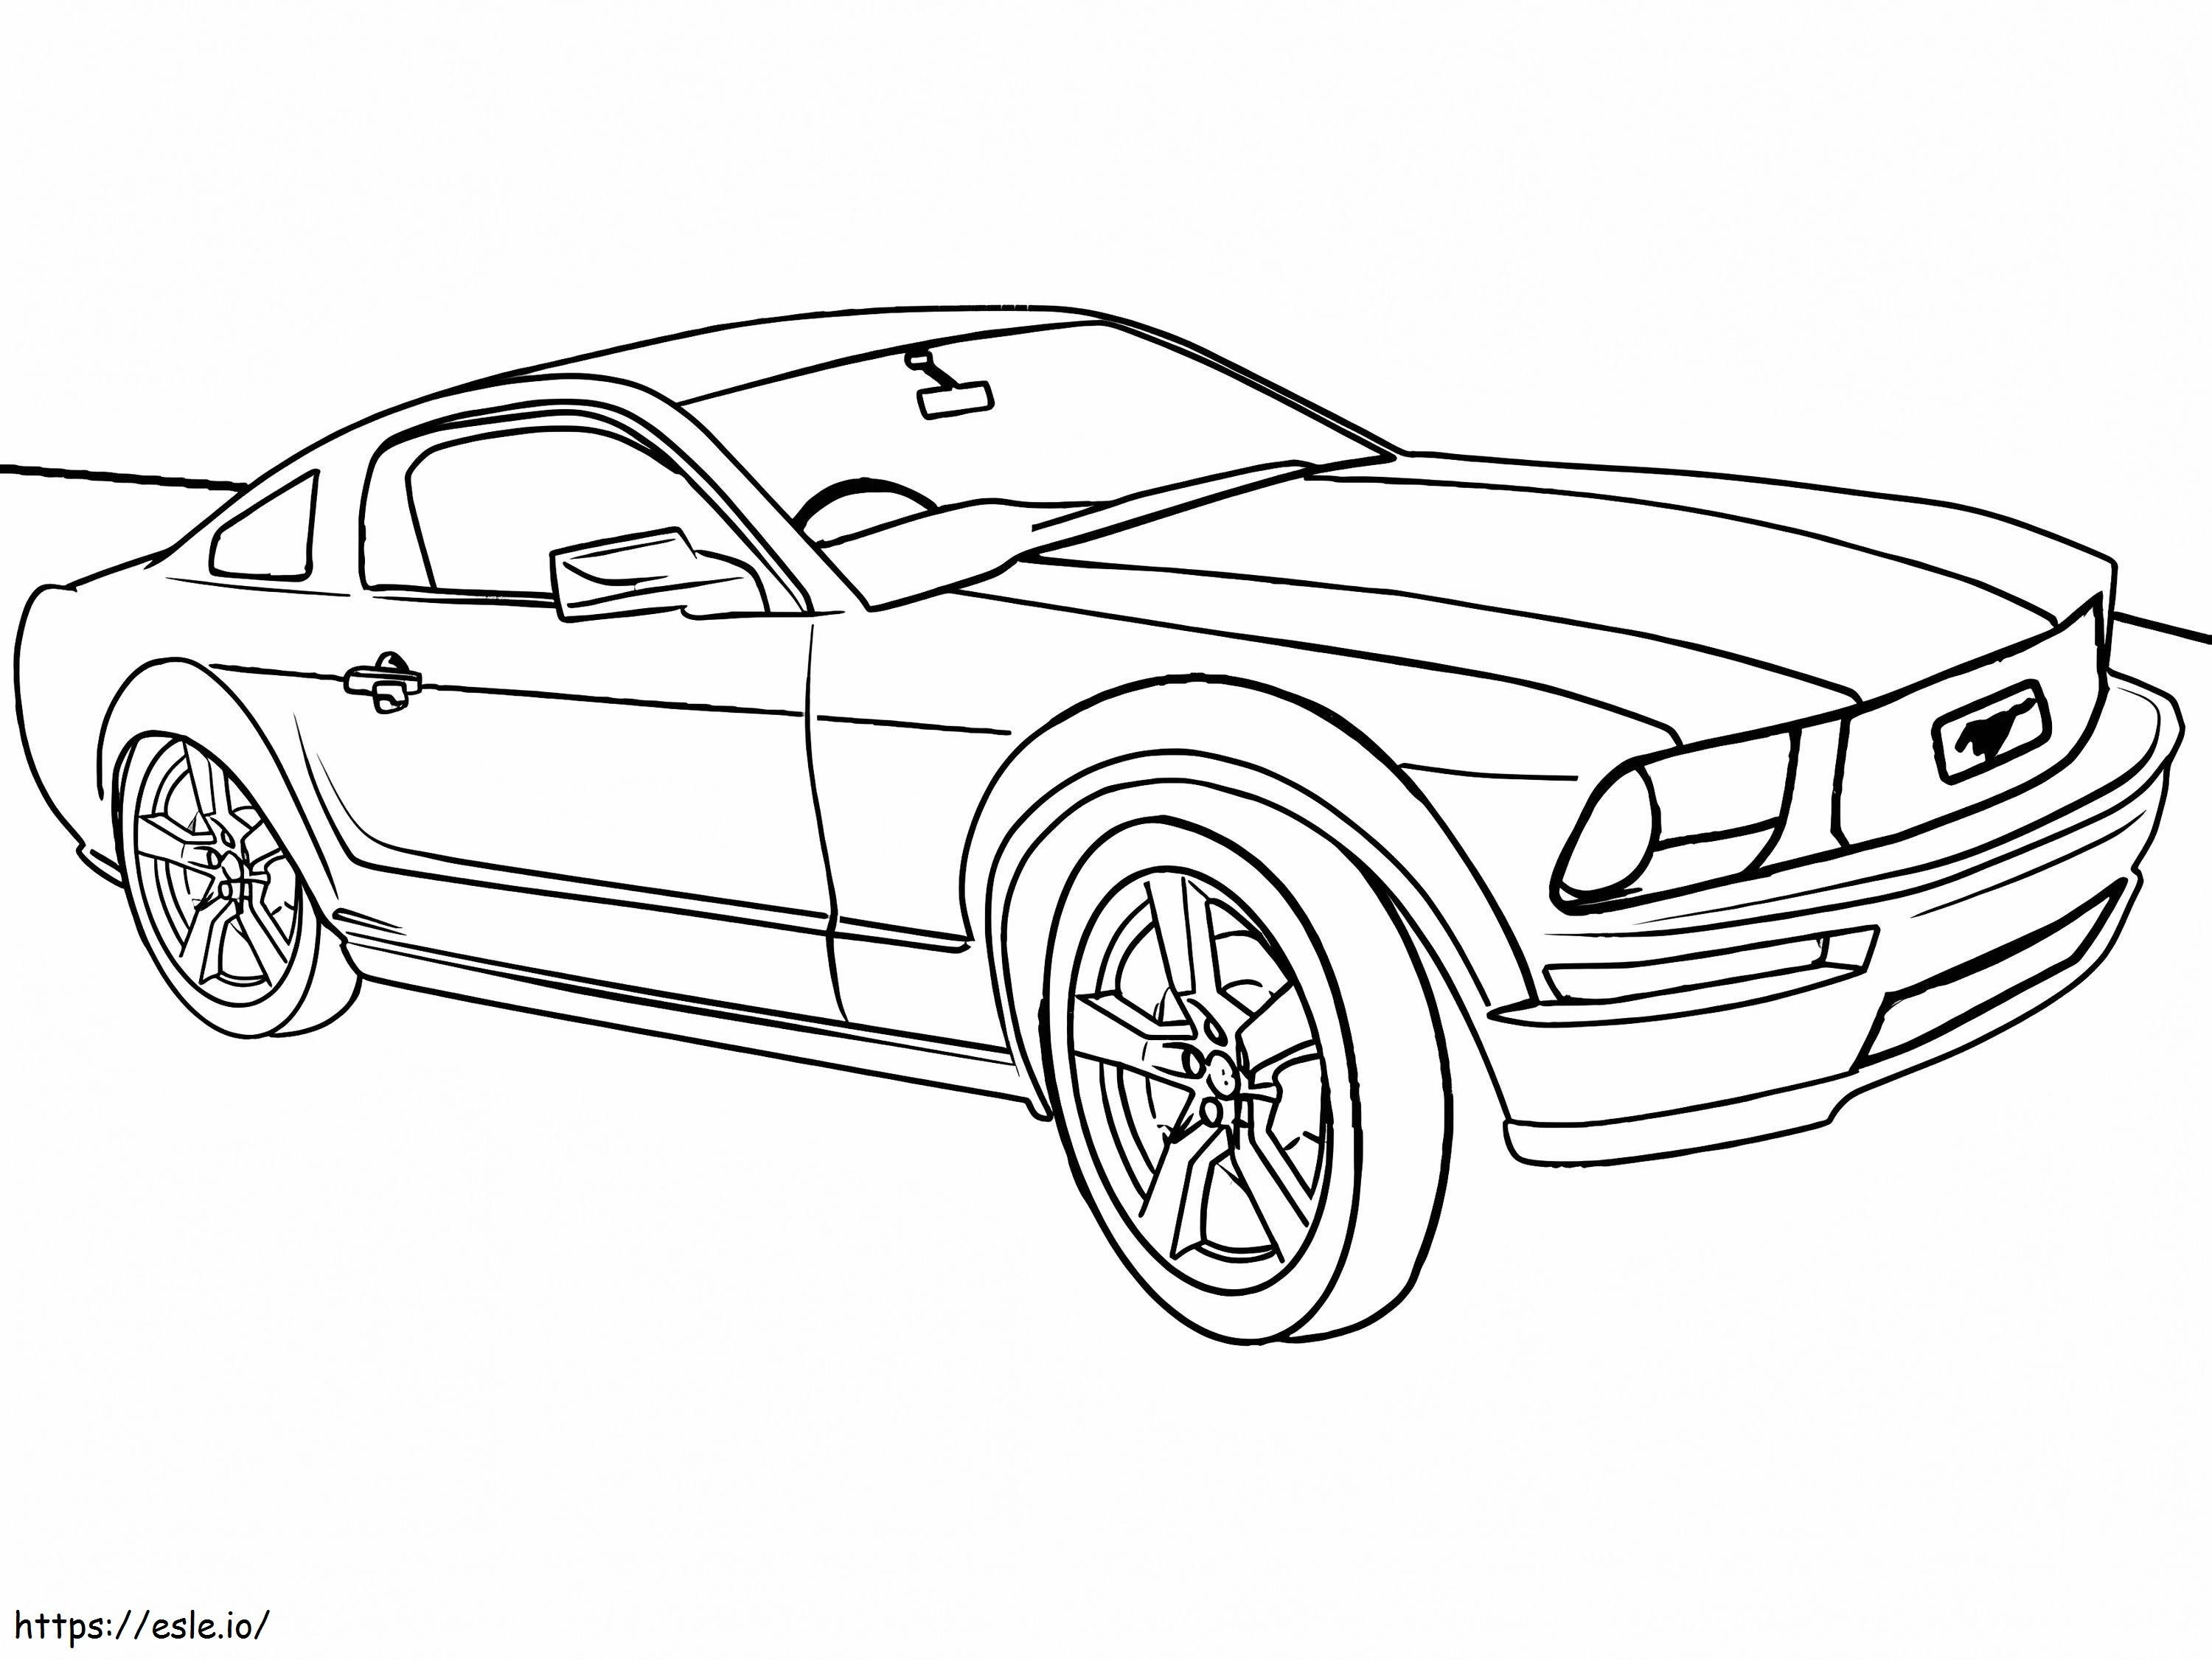 Mustang Car On Road coloring page